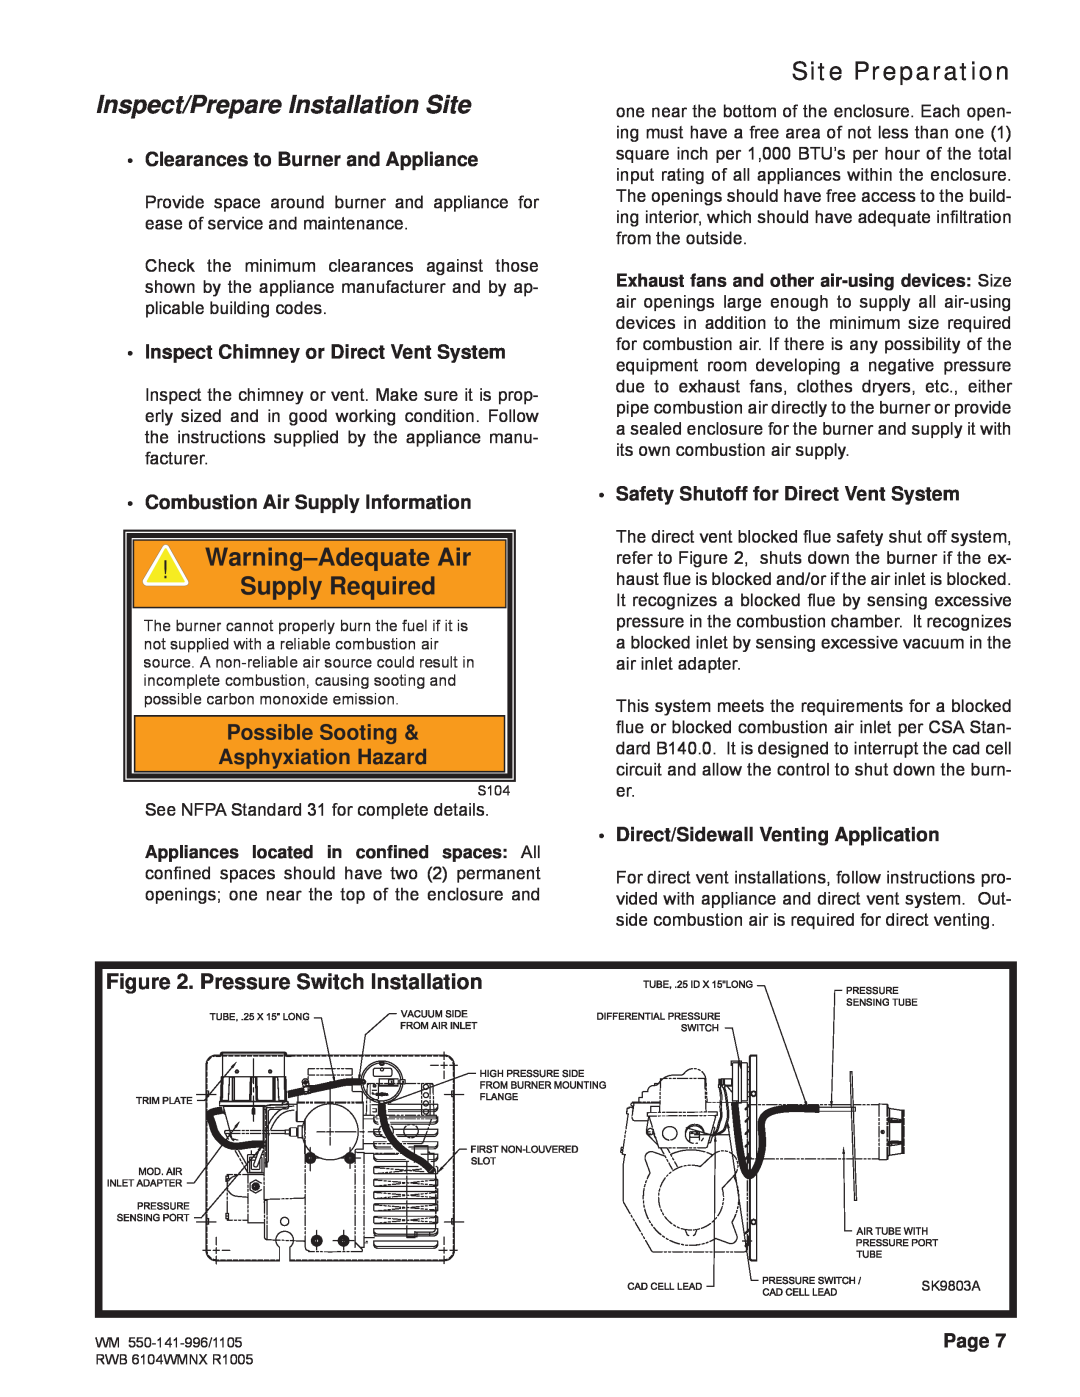 Weil-McLain NX manual Inspect/Prepare Installation Site, Site Preparation, Warning-AdequateAir Supply Required, Page 